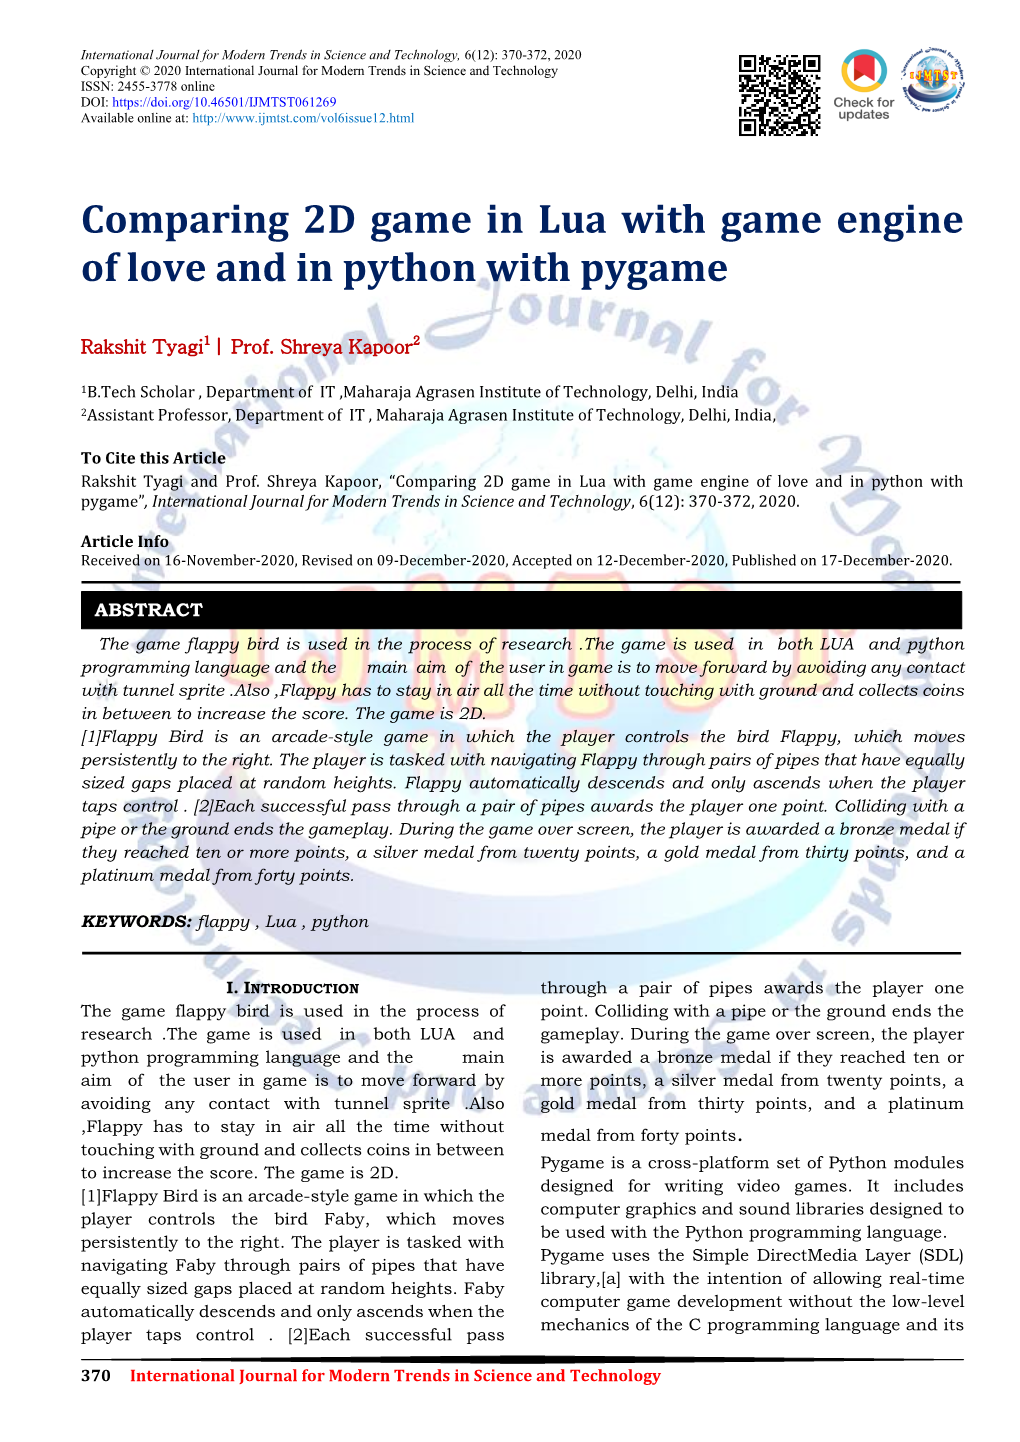 Comparing 2D Game in Lua with Game Engine of Love and in Python with Pygame